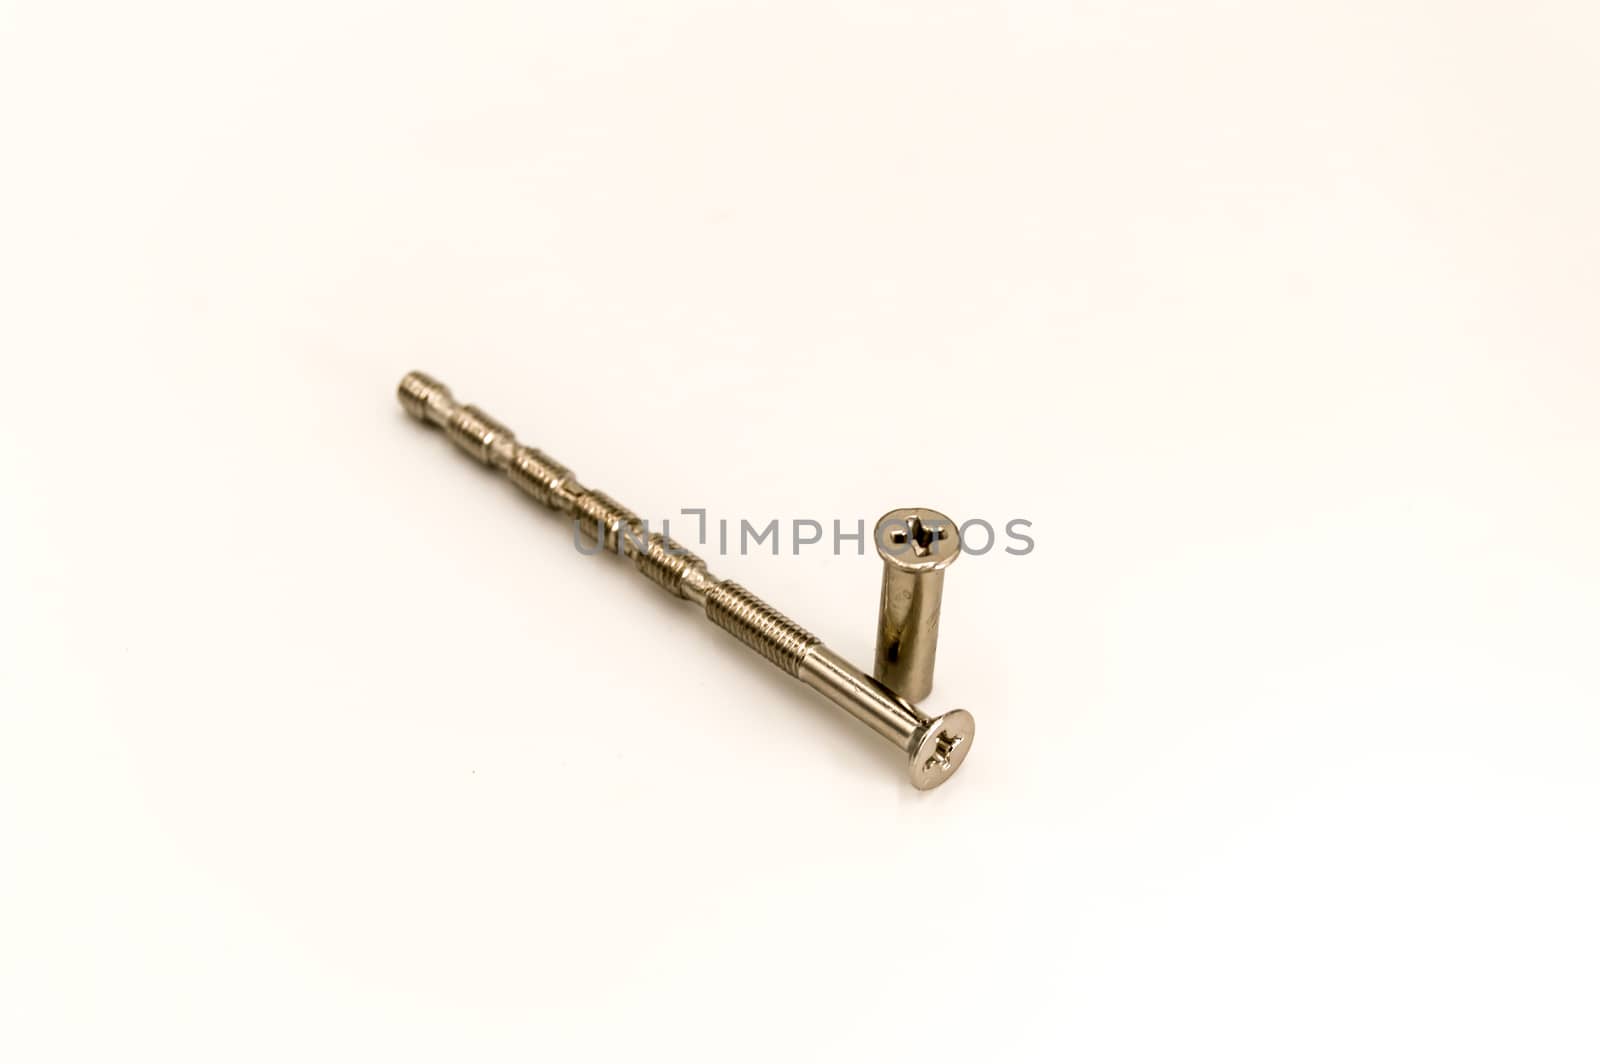 Screw and its metal door handle socket on a background on white